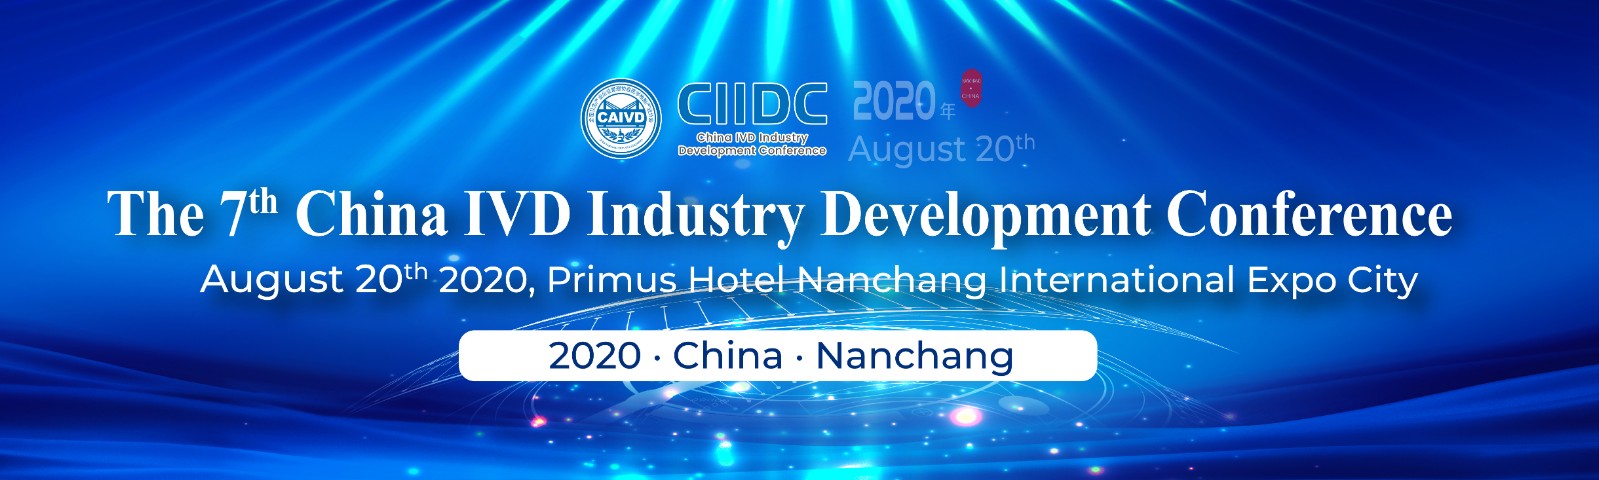 The 7th China IVD Industry Development ConferenceCIIDC